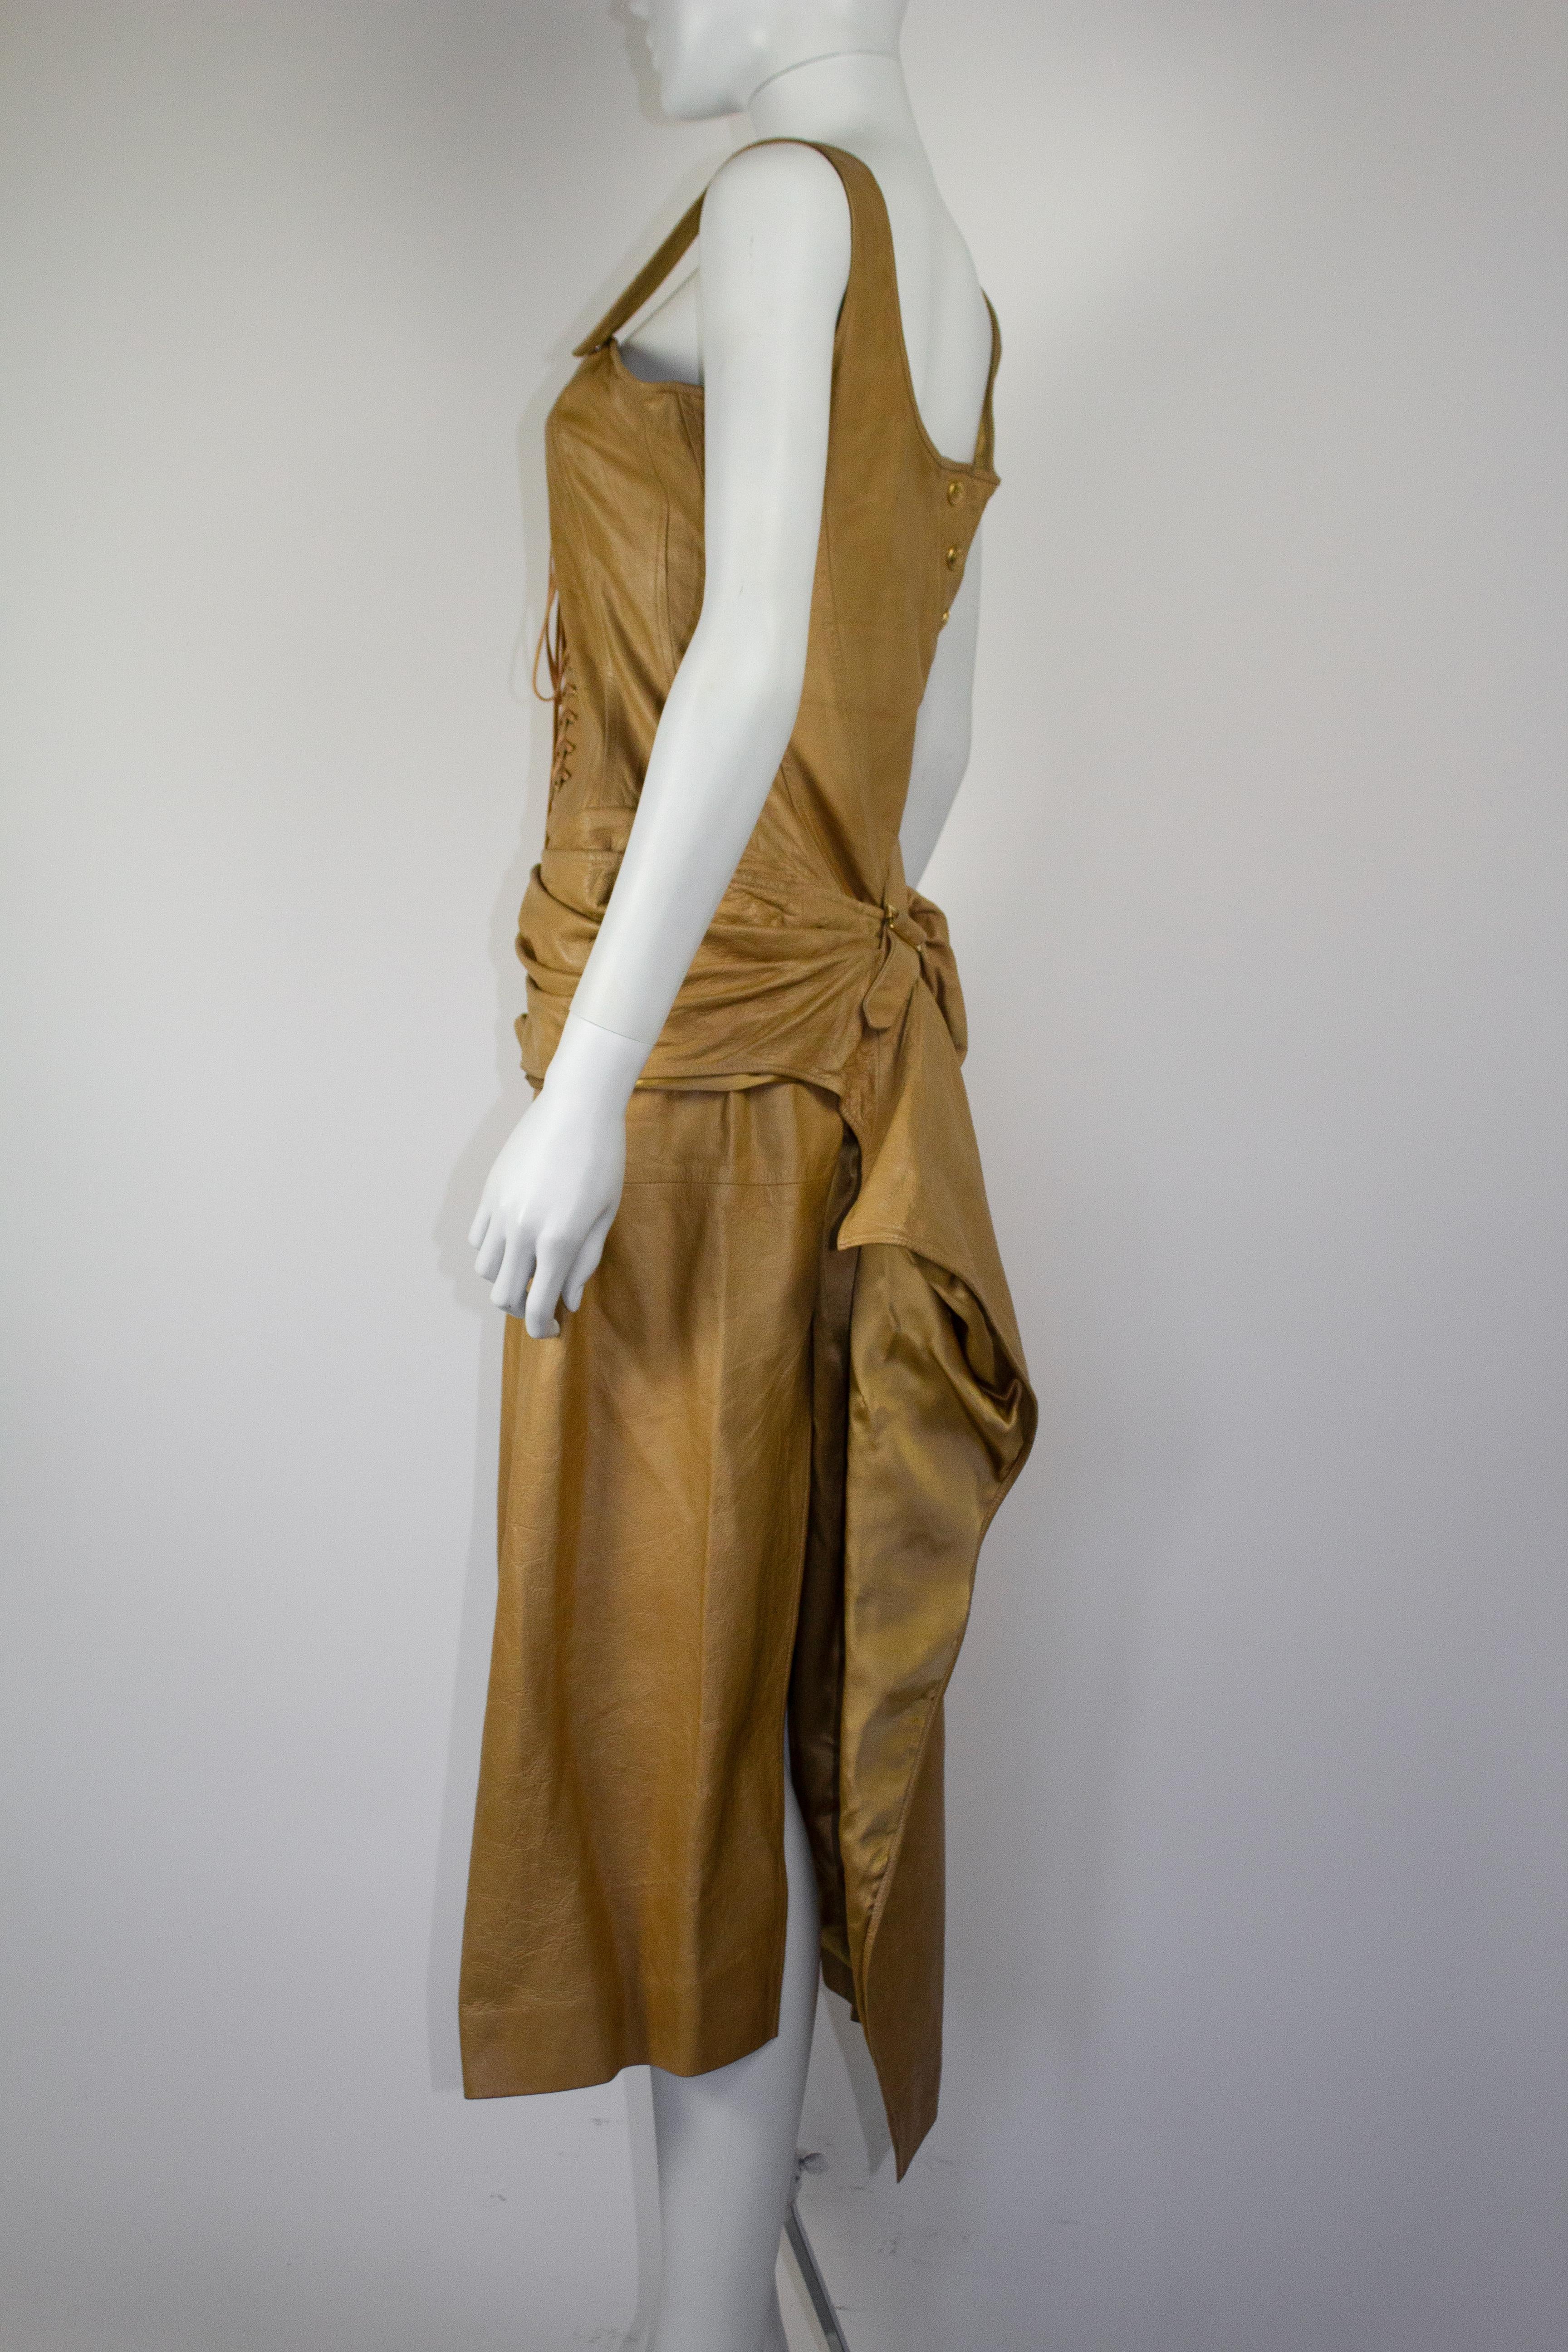 Brown Christian Dior by John Galliano Leather Corset Dress S/S 2000 